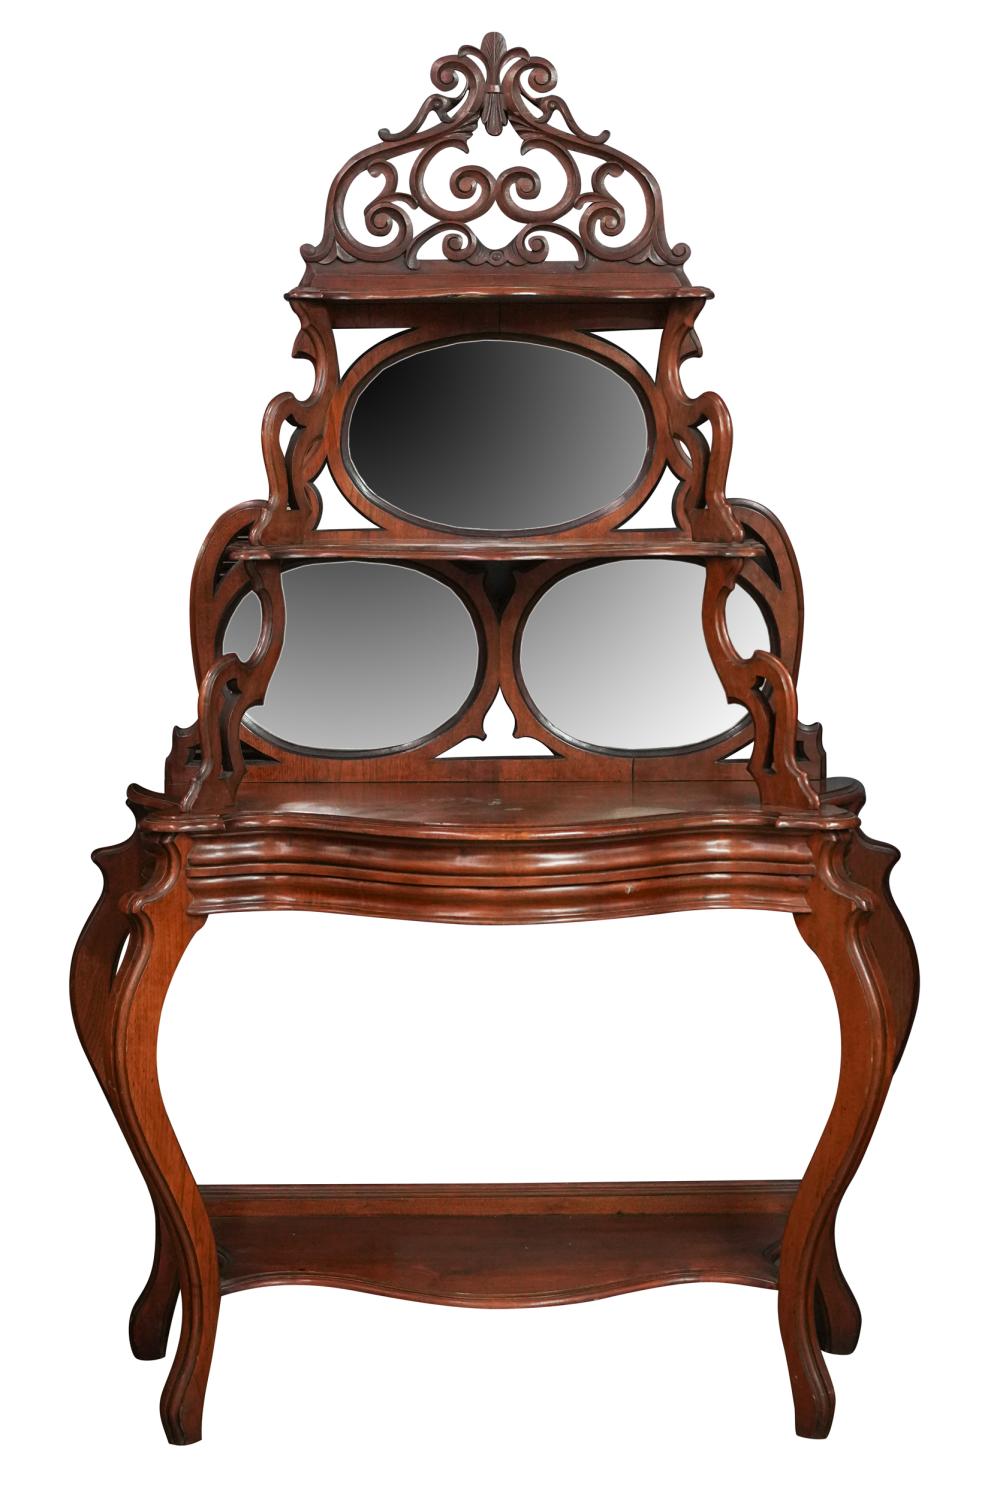 ROCOCO REVIVAL CARVED OAK ETAGERE19th